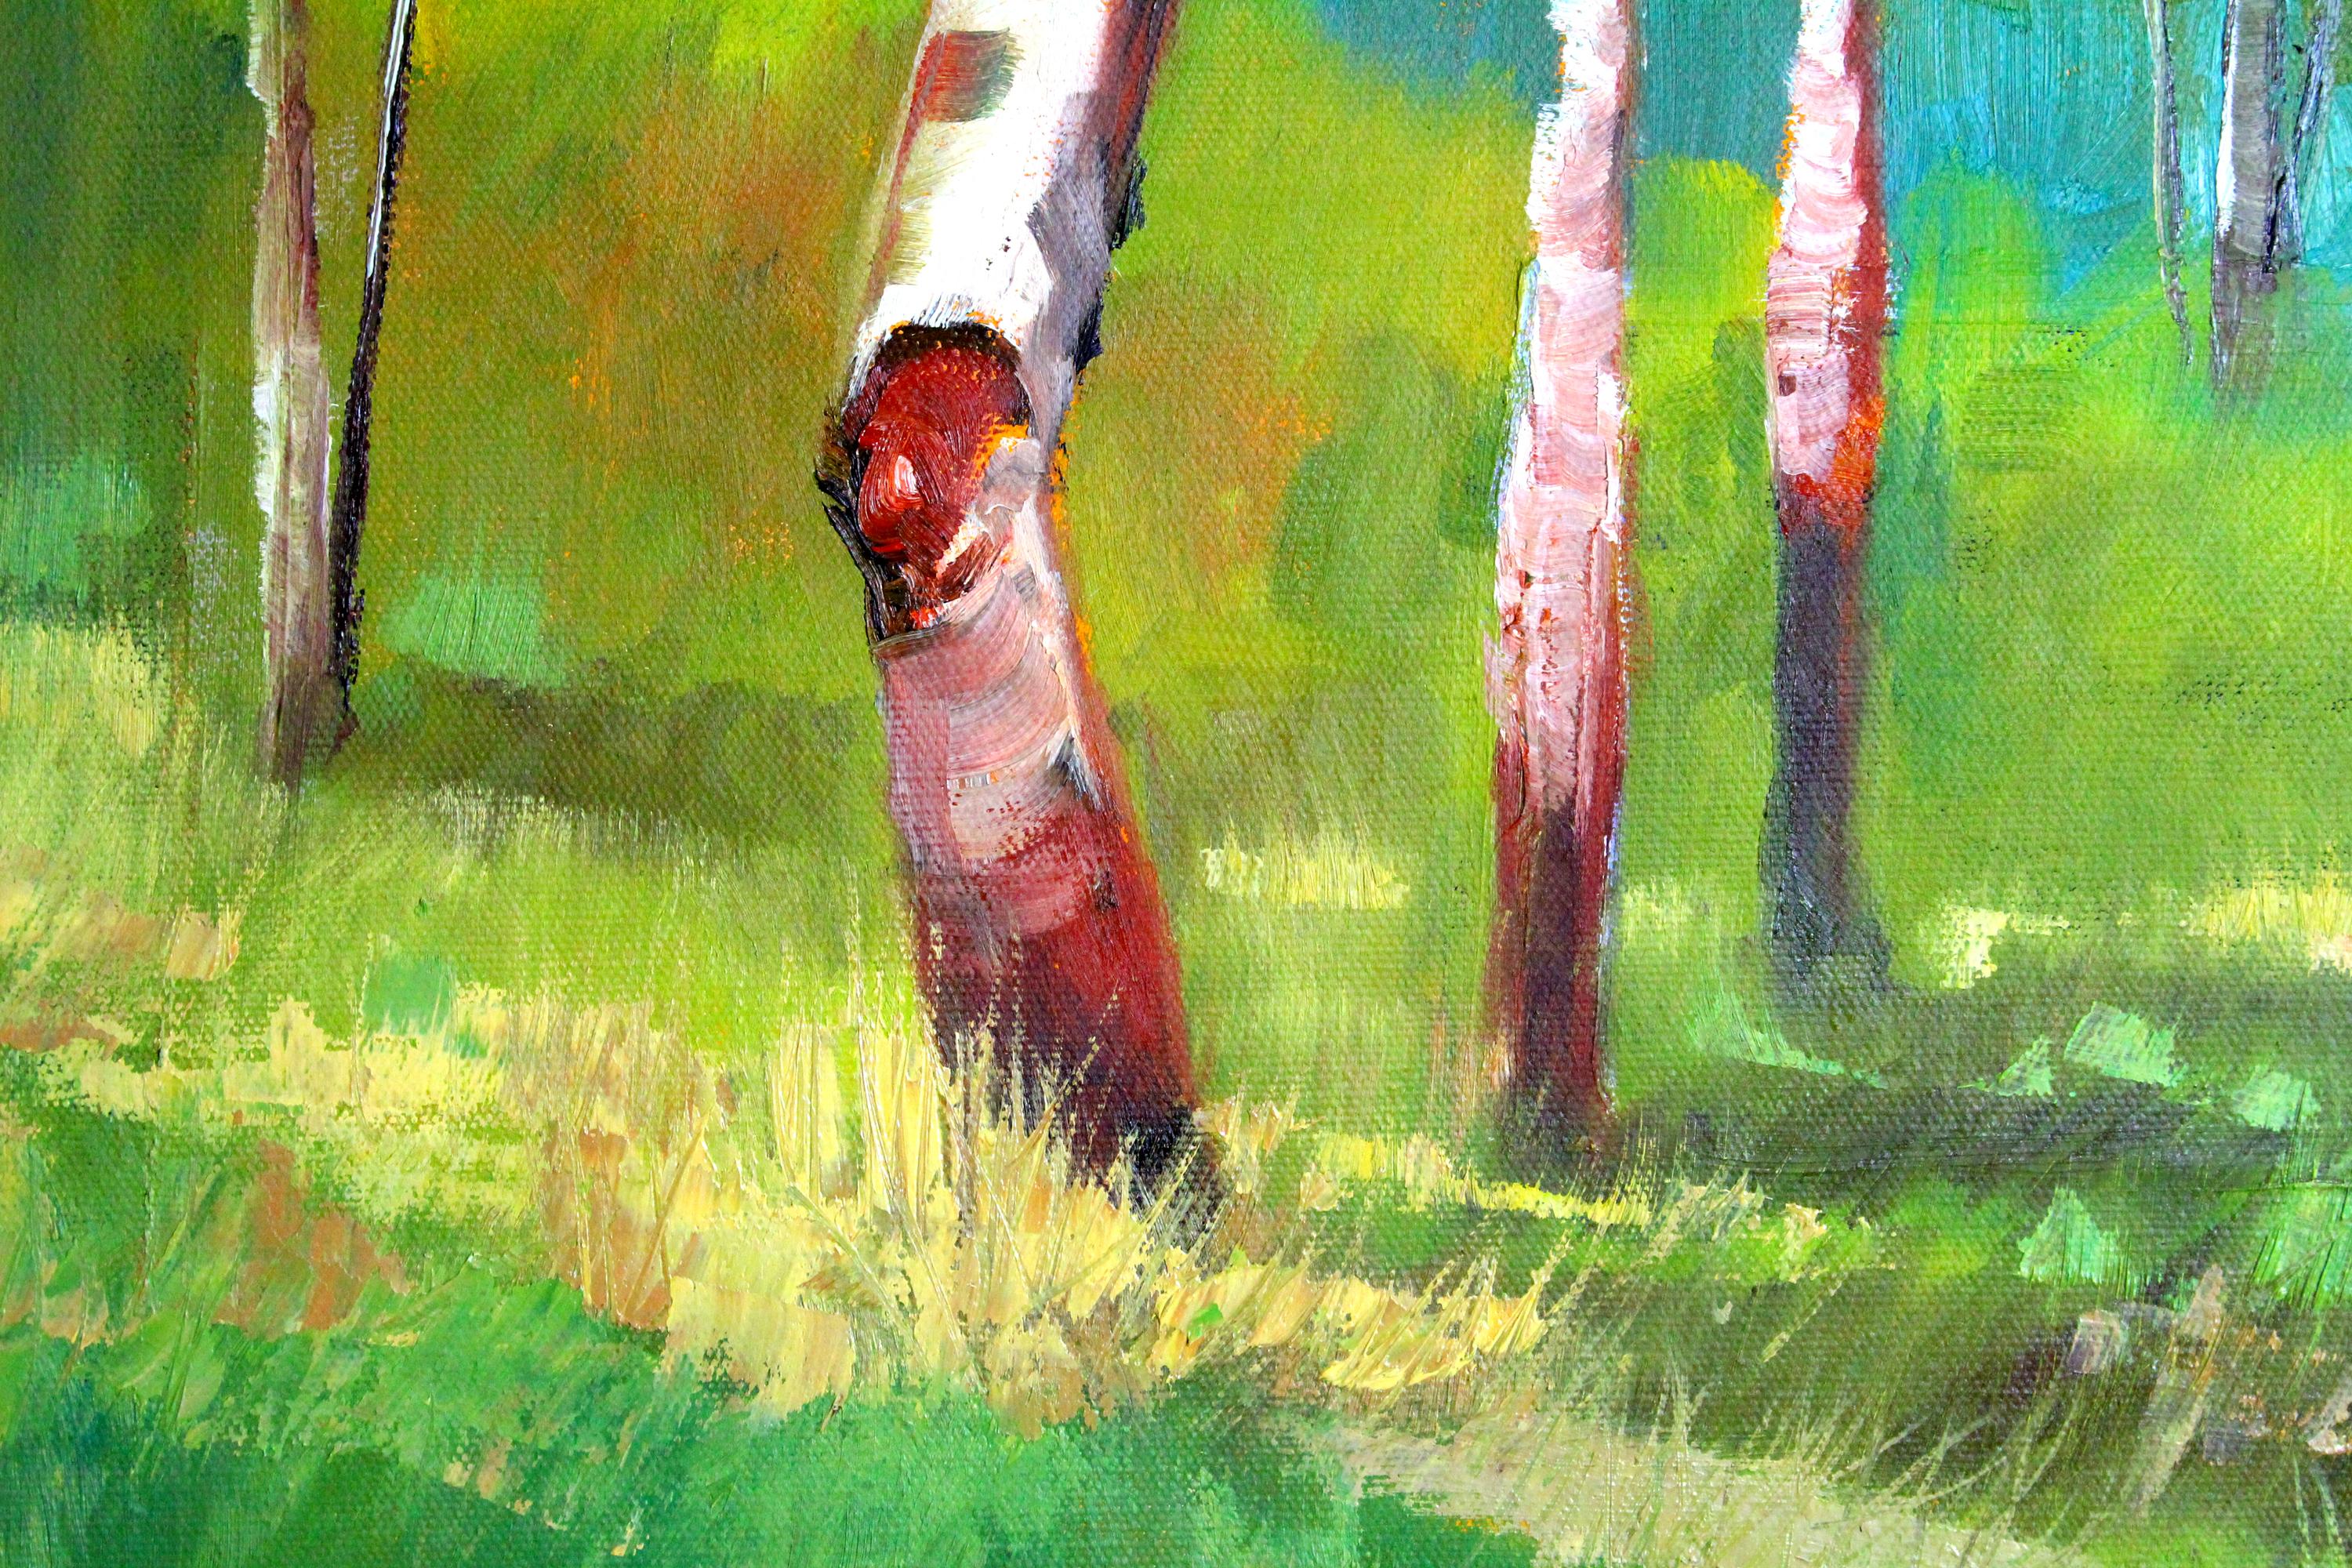 <p>Artist Comments<br />Birch trees in a summer forest were the inspiration for this landscape painting. The colors are bright and the season is relaxed.</p><p>About the Artist<br />Nancy Merkle's process begins with a glimpse of color, a flicker of